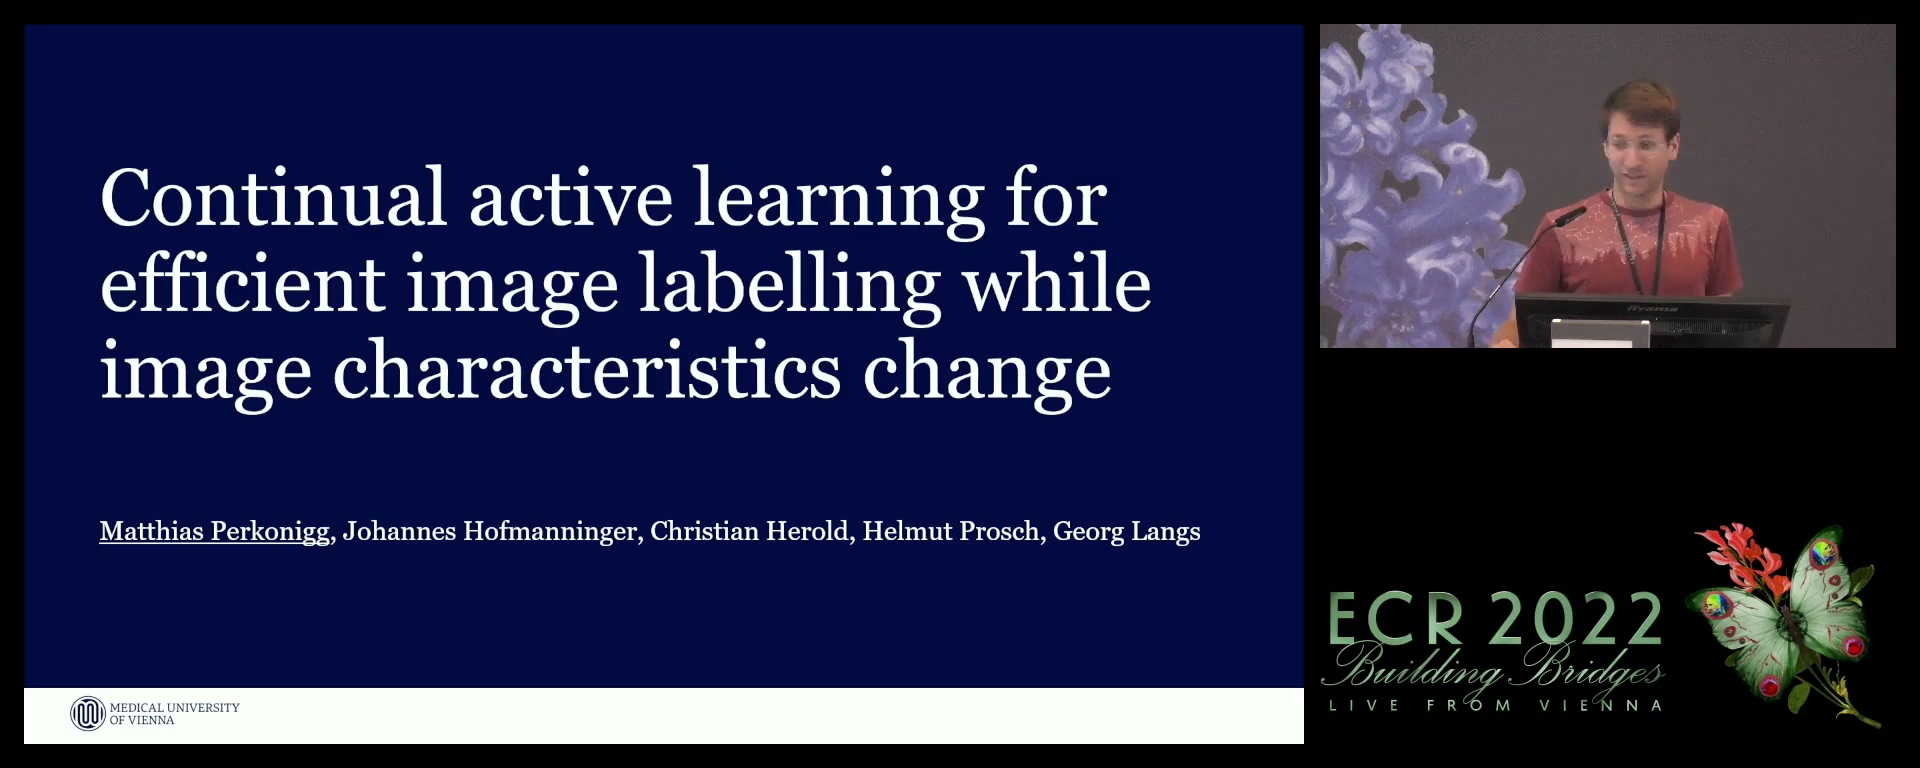 Continual active learning for efficient image labelling while image characteristics change - Matthias Perkonigg, Wien / AT